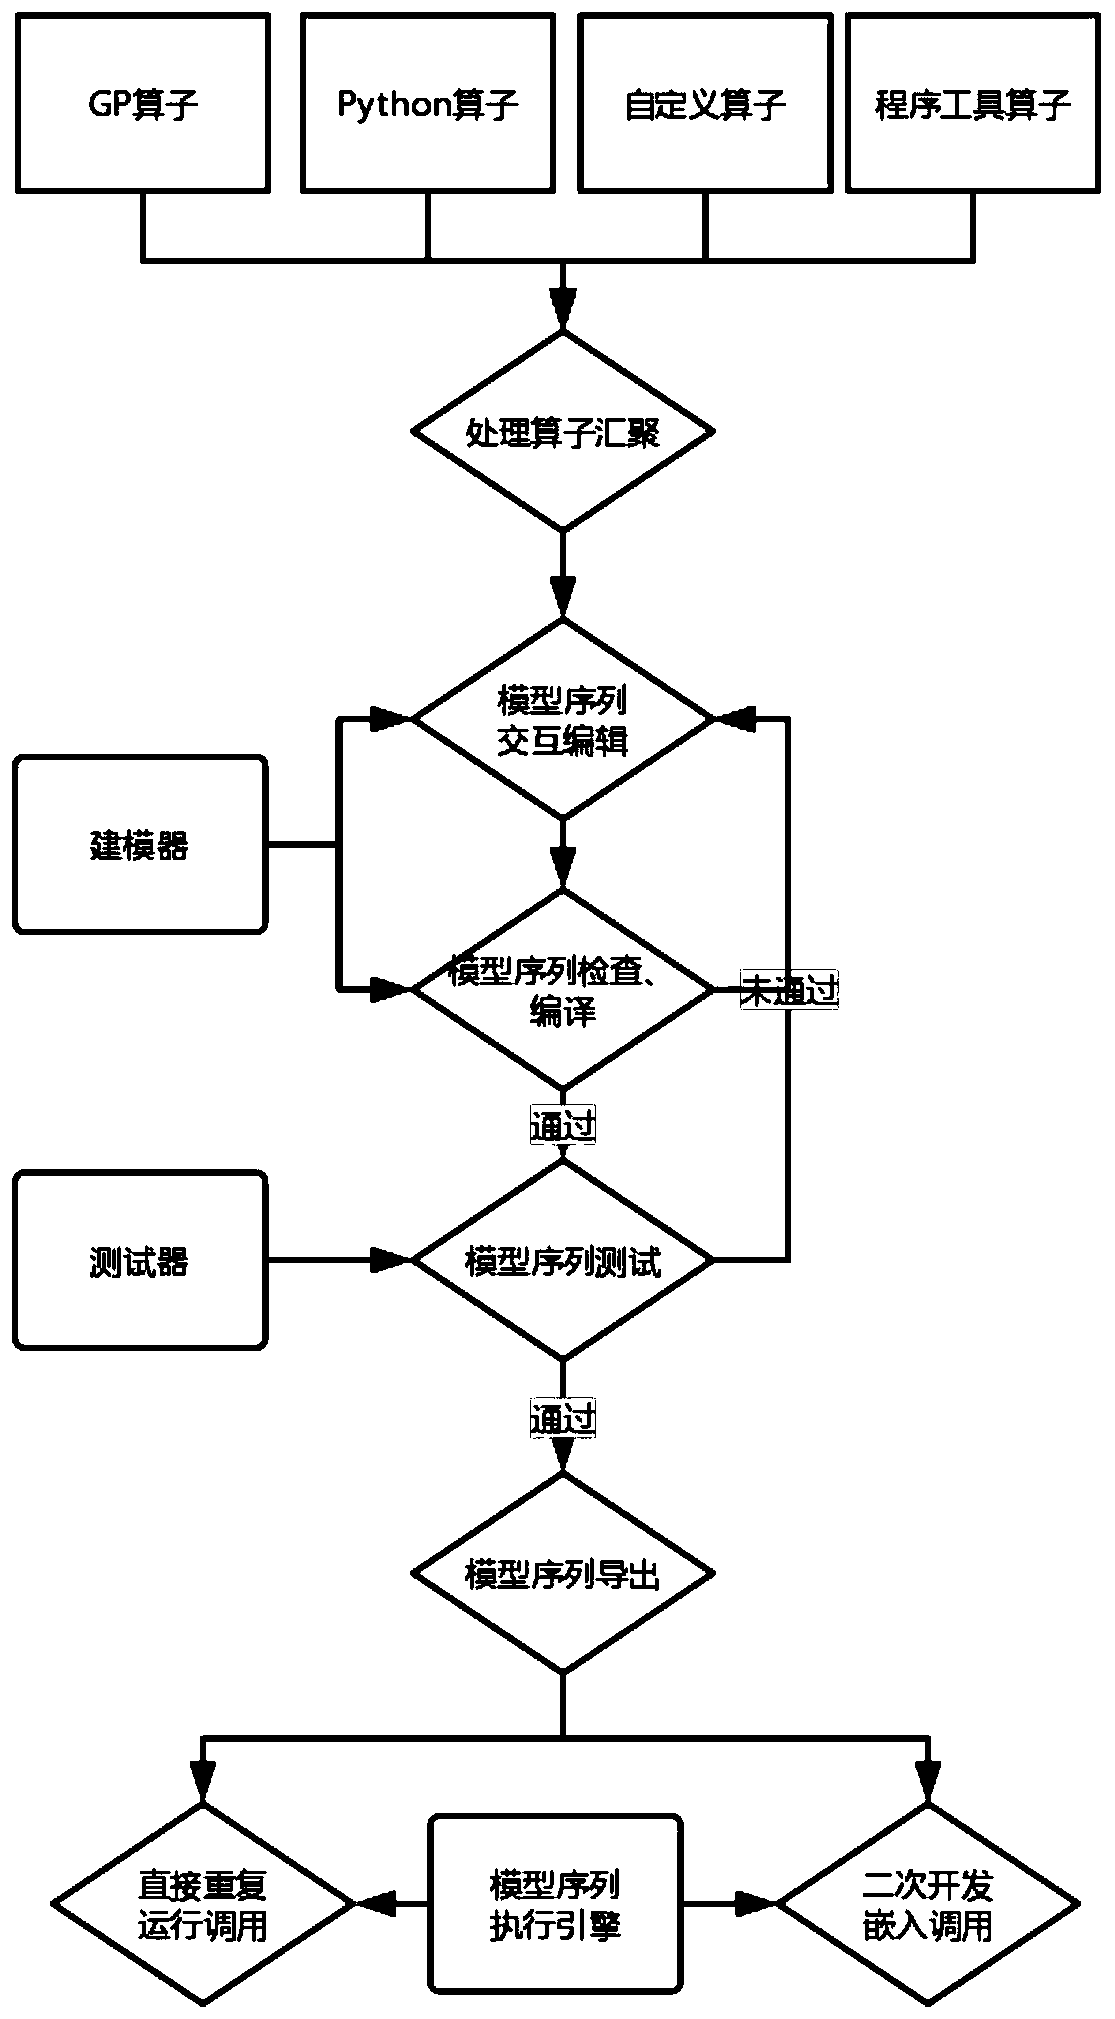 Automatic reusable geographic space information processing rapid modeling method